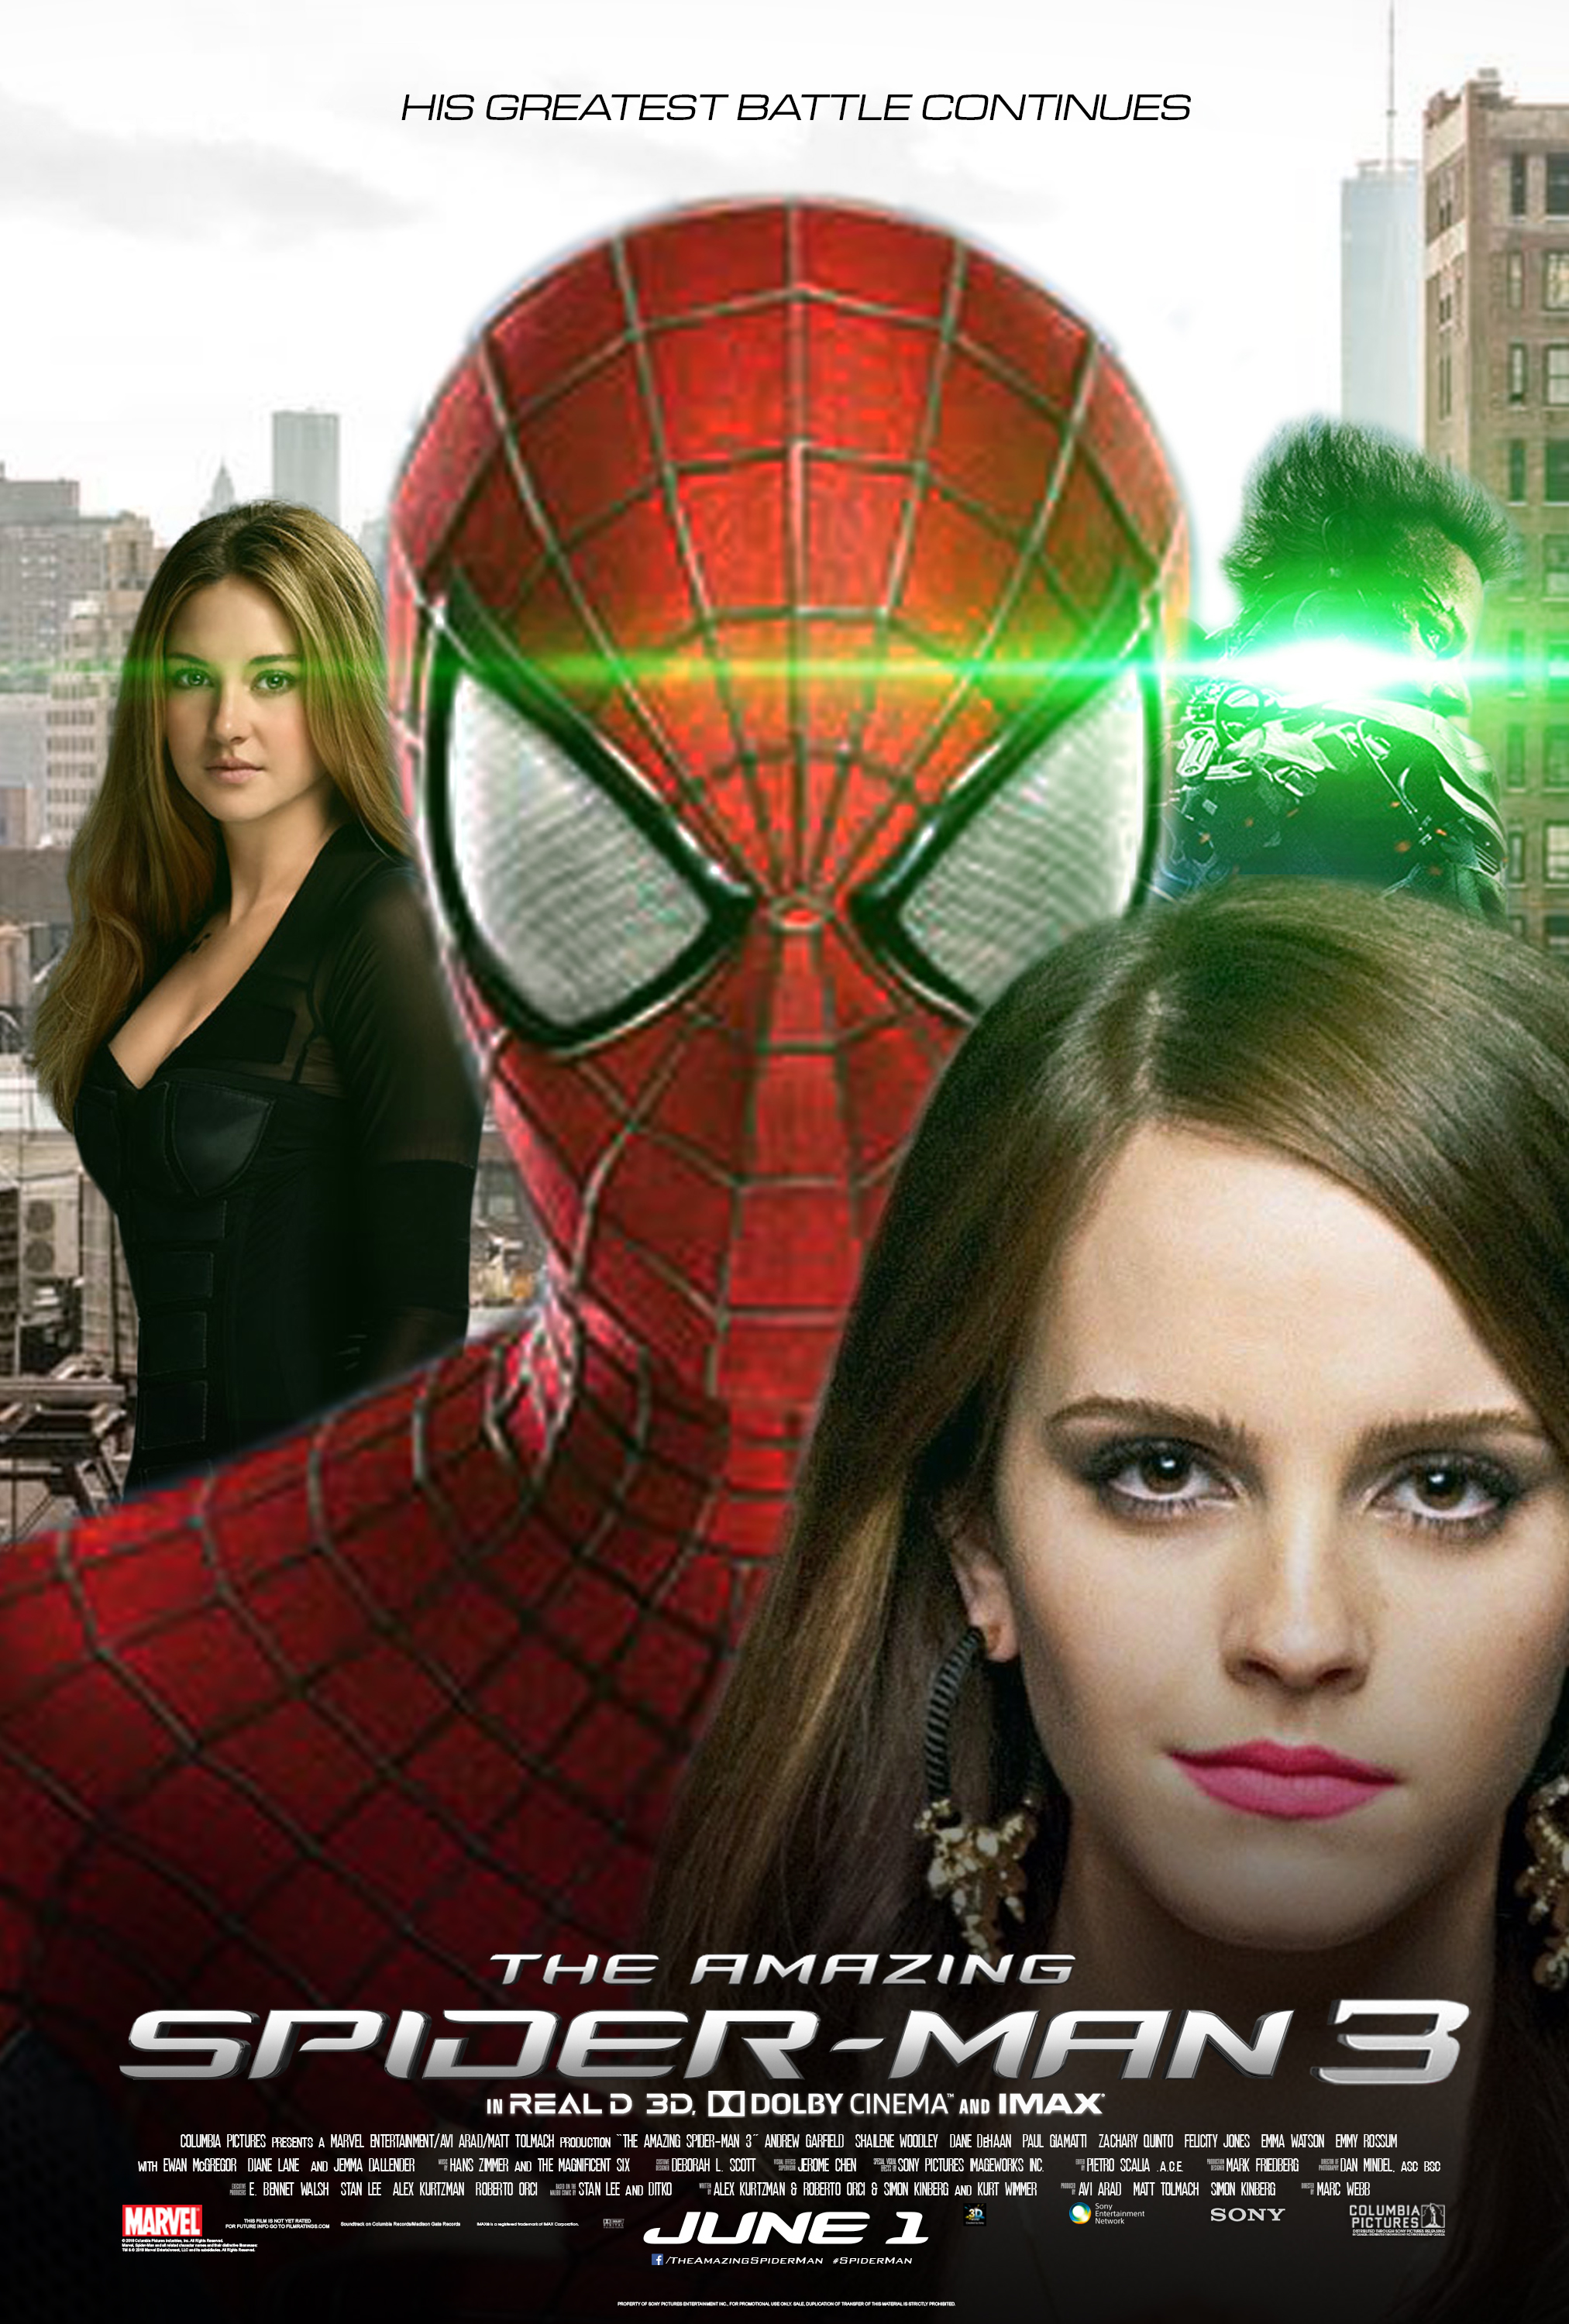 The Amazing Spider-Man 3 to Reunite Andrew Garfield With Emma